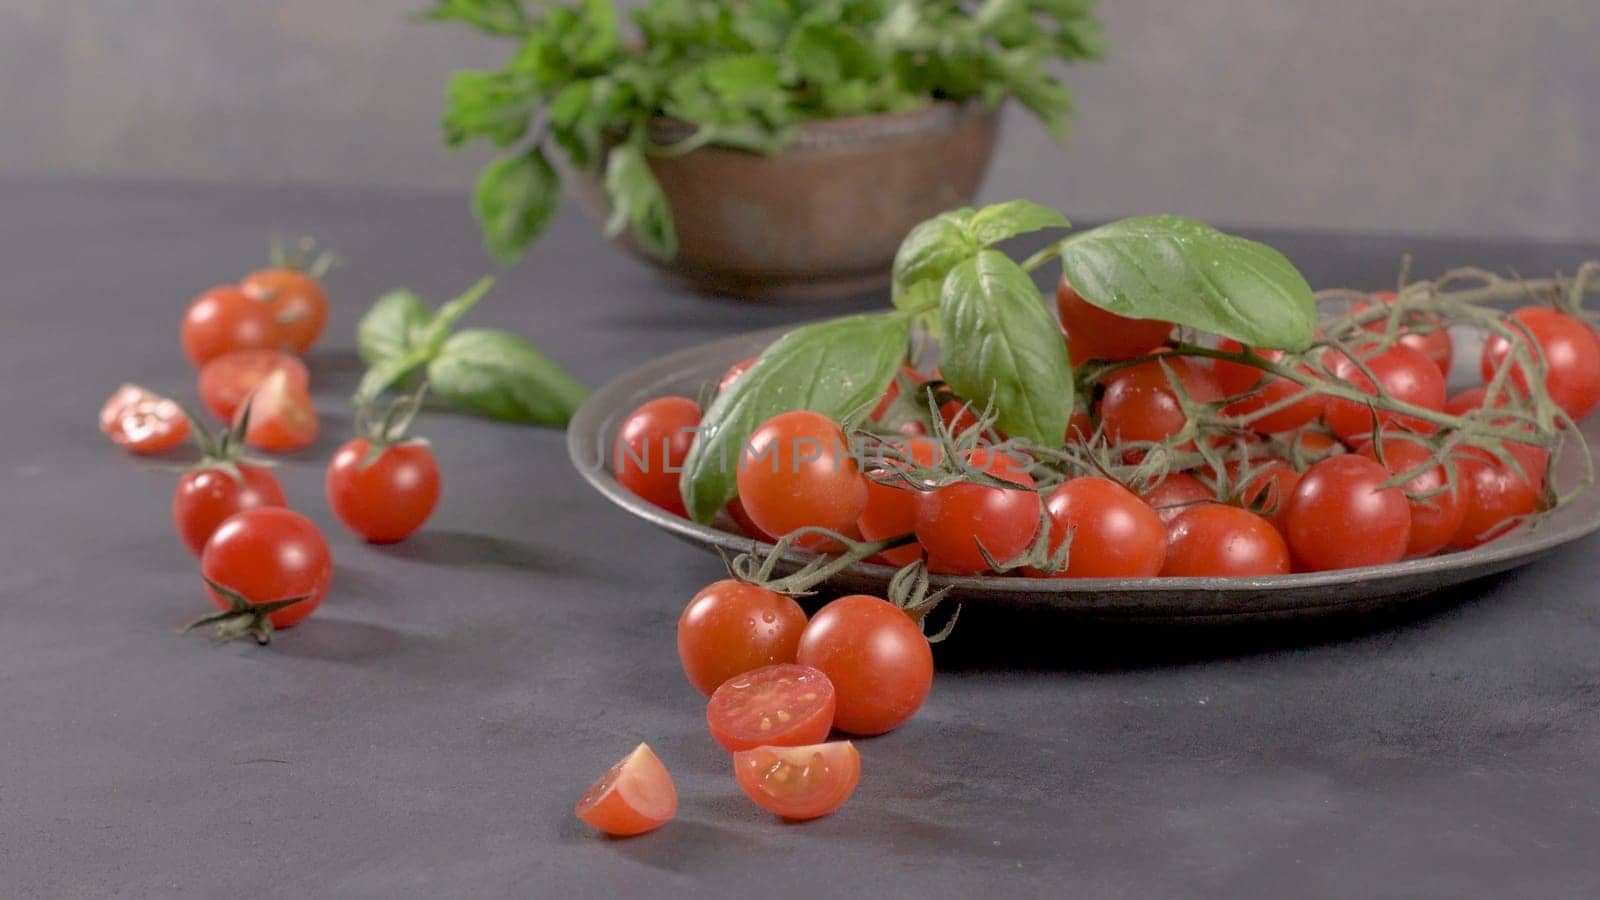 Small red cherry tomatoes by homydesign